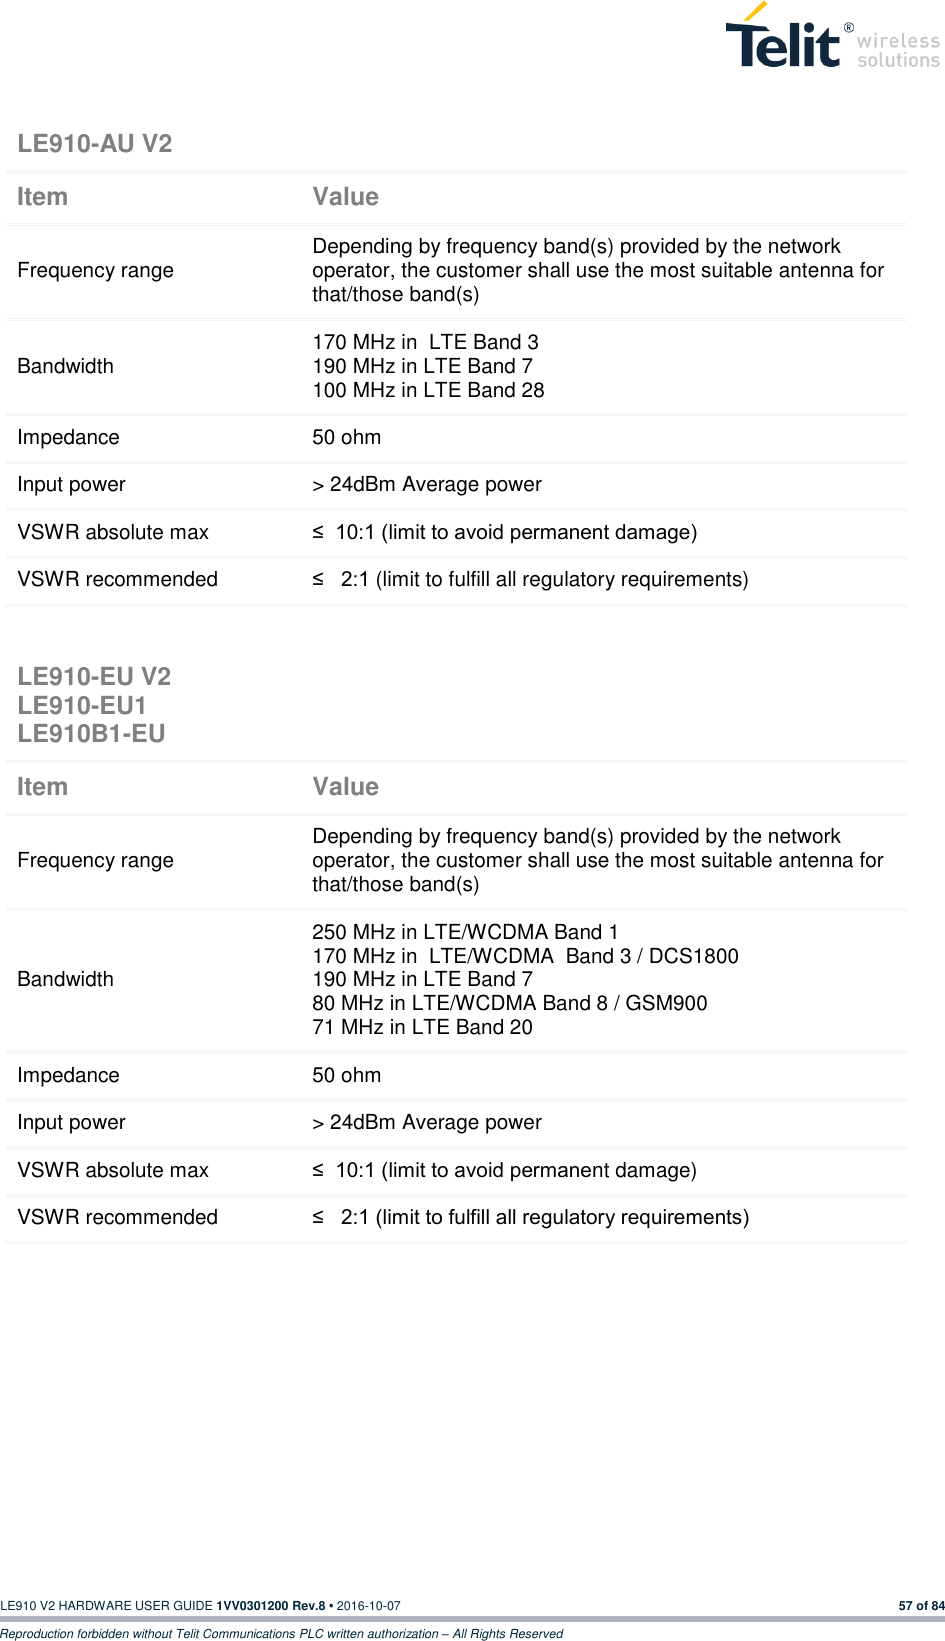   LE910 V2 HARDWARE USER GUIDE 1VV0301200 Rev.8 • 2016-10-07 57 of 84 Reproduction forbidden without Telit Communications PLC written authorization – All Rights Reserved   LE910-AU V2  Item Value Frequency range Depending by frequency band(s) provided by the network operator, the customer shall use the most suitable antenna for that/those band(s) Bandwidth 170 MHz in  LTE Band 3 190 MHz in LTE Band 7 100 MHz in LTE Band 28 Impedance 50 ohm Input power &gt; 24dBm Average power VSWR absolute max ≤  10:1 (limit to avoid permanent damage) VSWR recommended ≤   2:1 (limit to fulfill all regulatory requirements) LE910-EU V2 LE910-EU1 LE910B1-EU  Item Value Frequency range Depending by frequency band(s) provided by the network operator, the customer shall use the most suitable antenna for that/those band(s) Bandwidth 250 MHz in LTE/WCDMA Band 1 170 MHz in  LTE/WCDMA  Band 3 / DCS1800 190 MHz in LTE Band 7 80 MHz in LTE/WCDMA Band 8 / GSM900 71 MHz in LTE Band 20 Impedance 50 ohm Input power &gt; 24dBm Average power VSWR absolute max ≤  10:1 (limit to avoid permanent damage) VSWR recommended ≤   2:1 (limit to fulfill all regulatory requirements) 